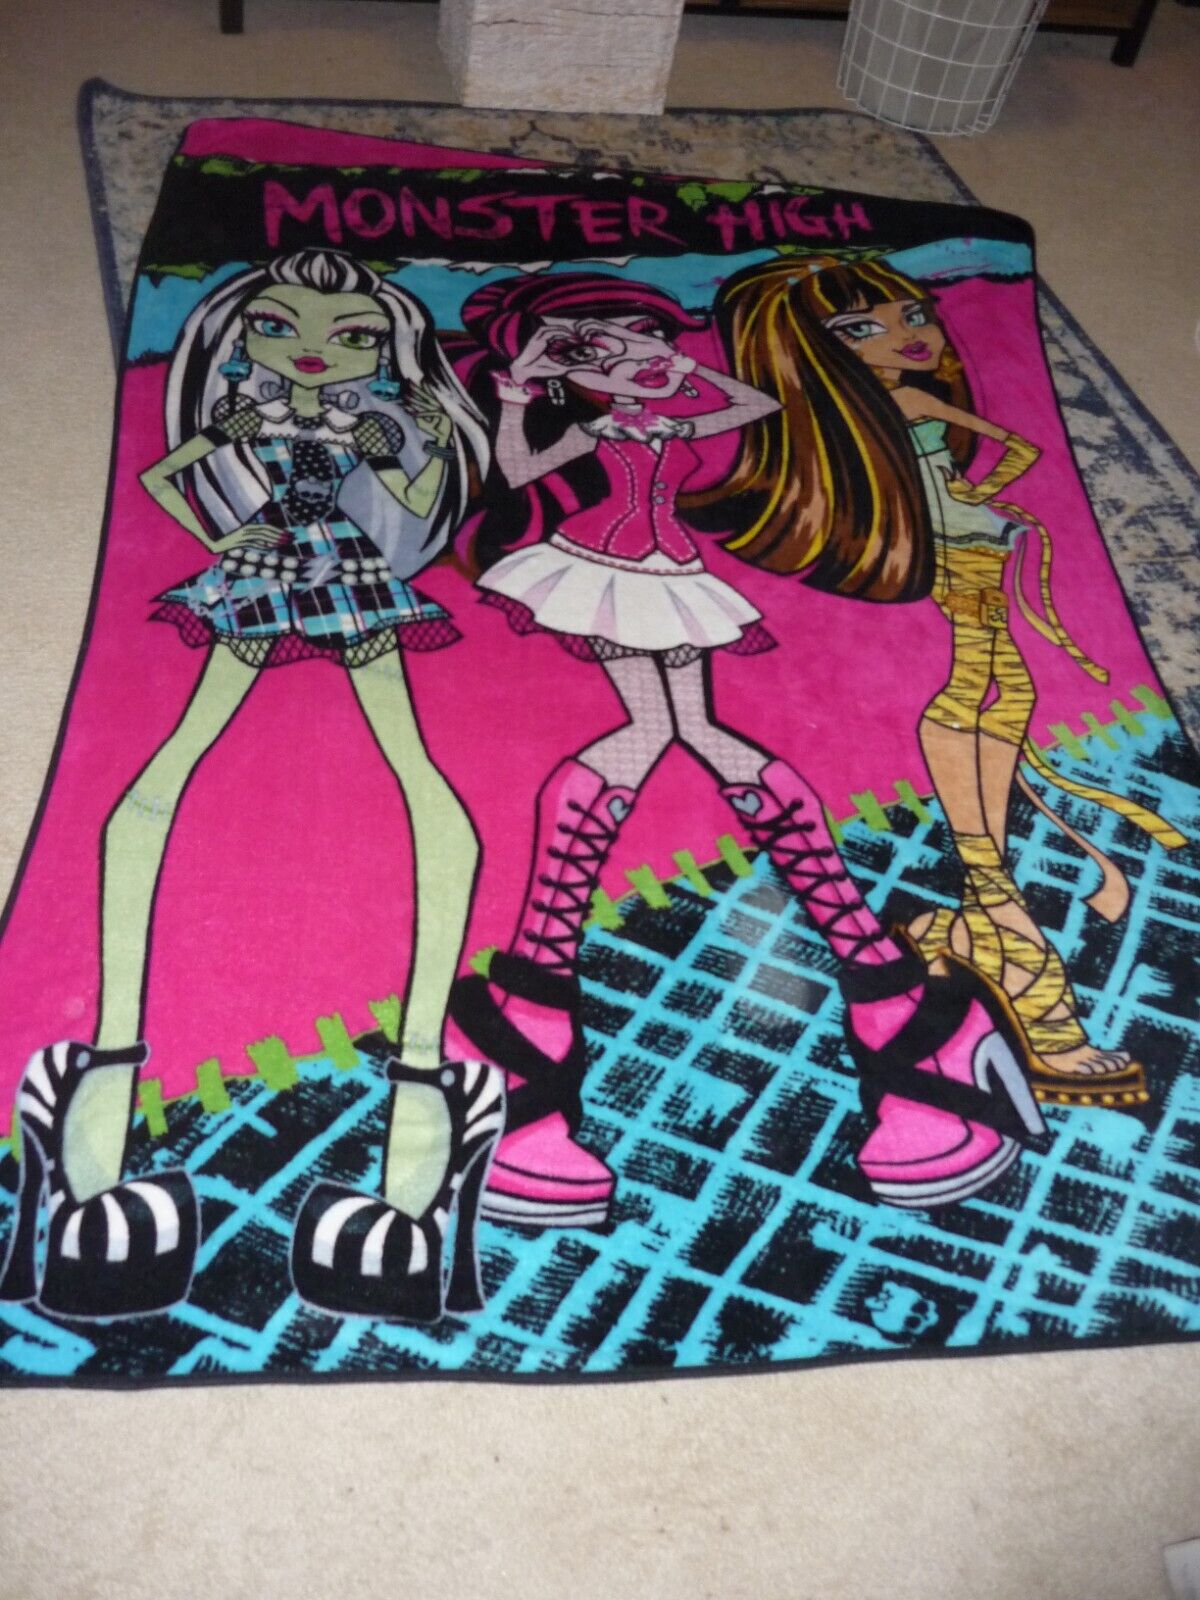 Monster High Fleece Throw Blanket Twin Bed Cover, 60x90 Draculaura Cleo Frankie